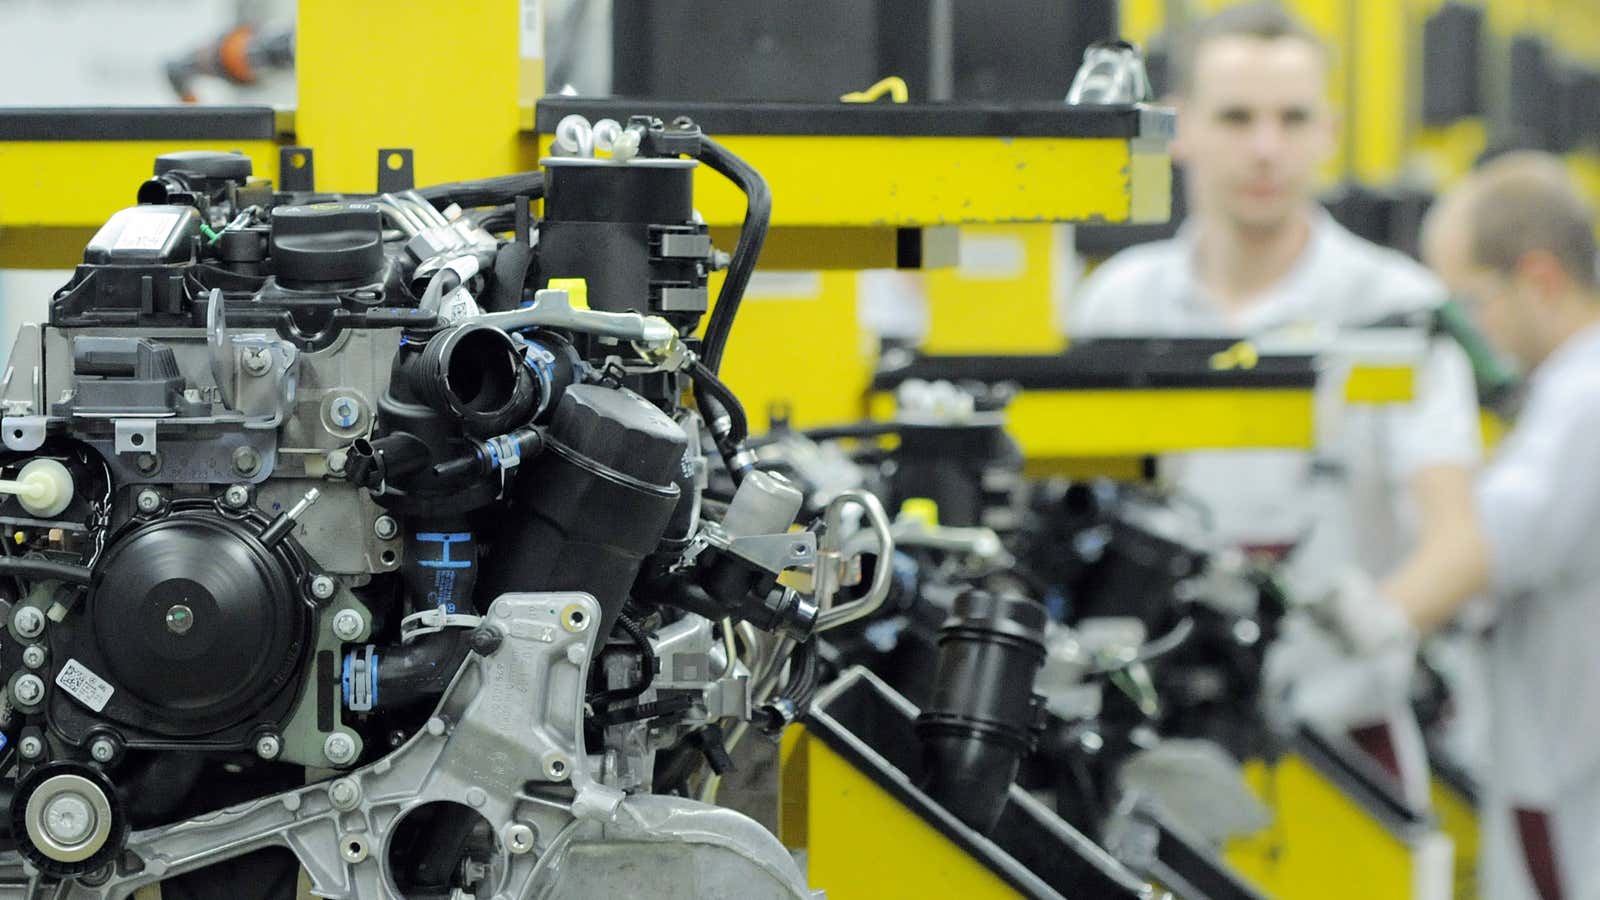 German firms hope that worldwide demand for their engineering prowess will see them through the euro crisis.